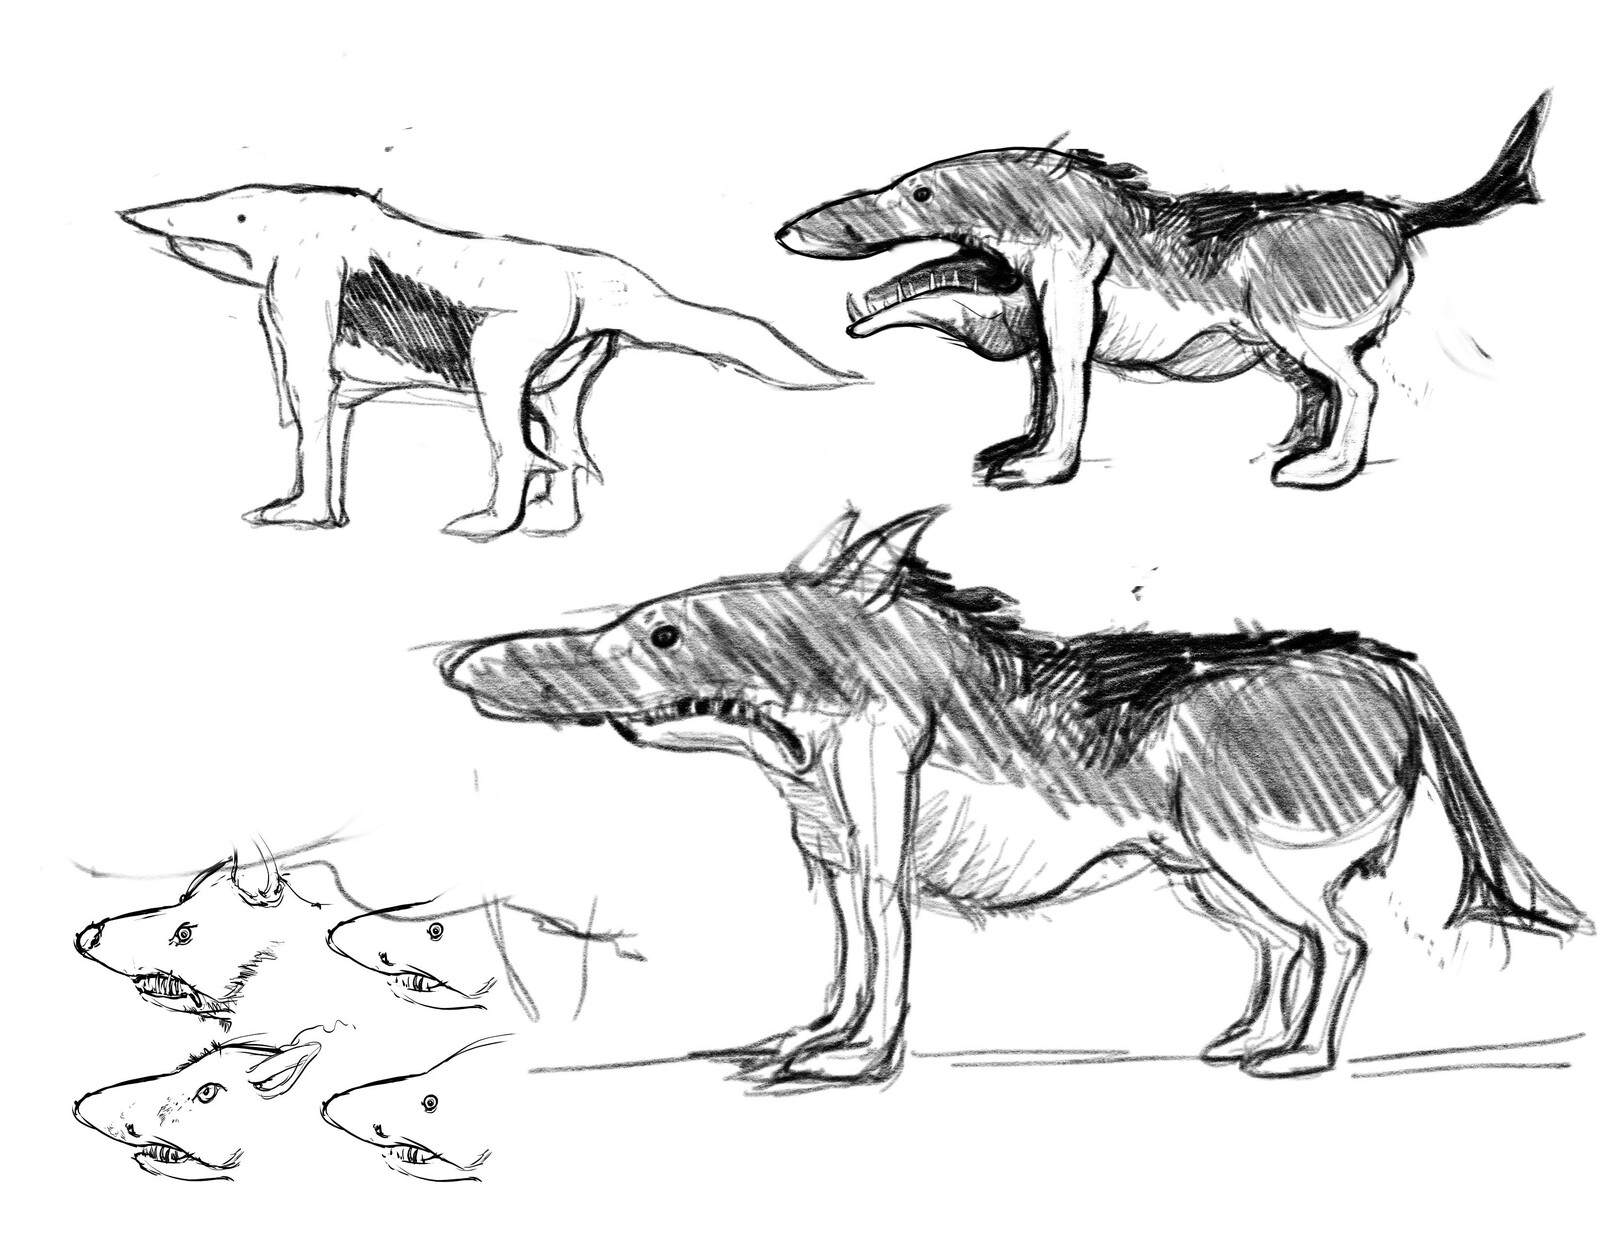 Concept ideation for the Shark Wolf creature character #2.